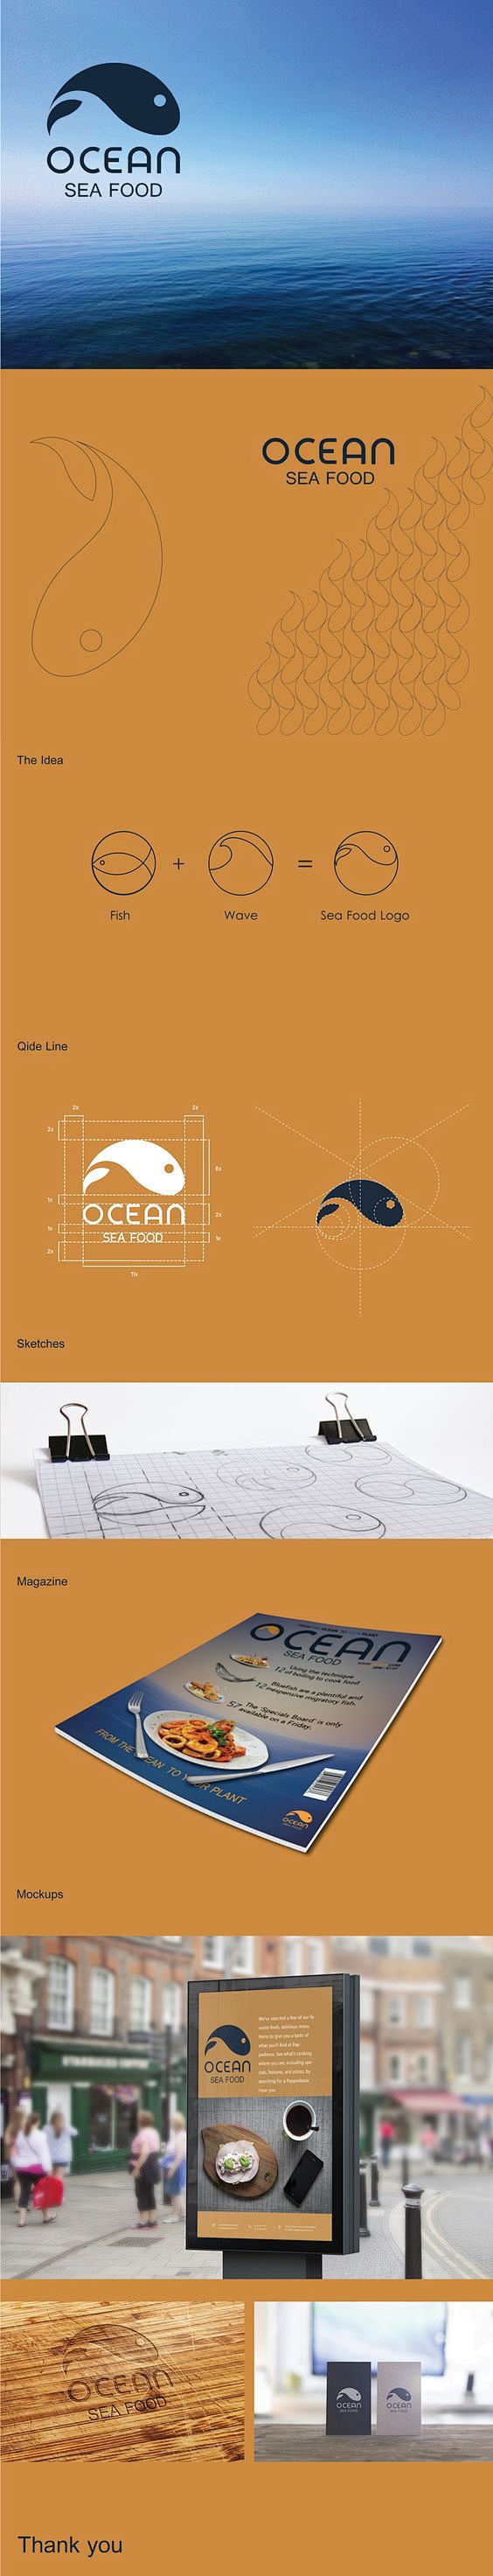 Ocean is a logo and ...